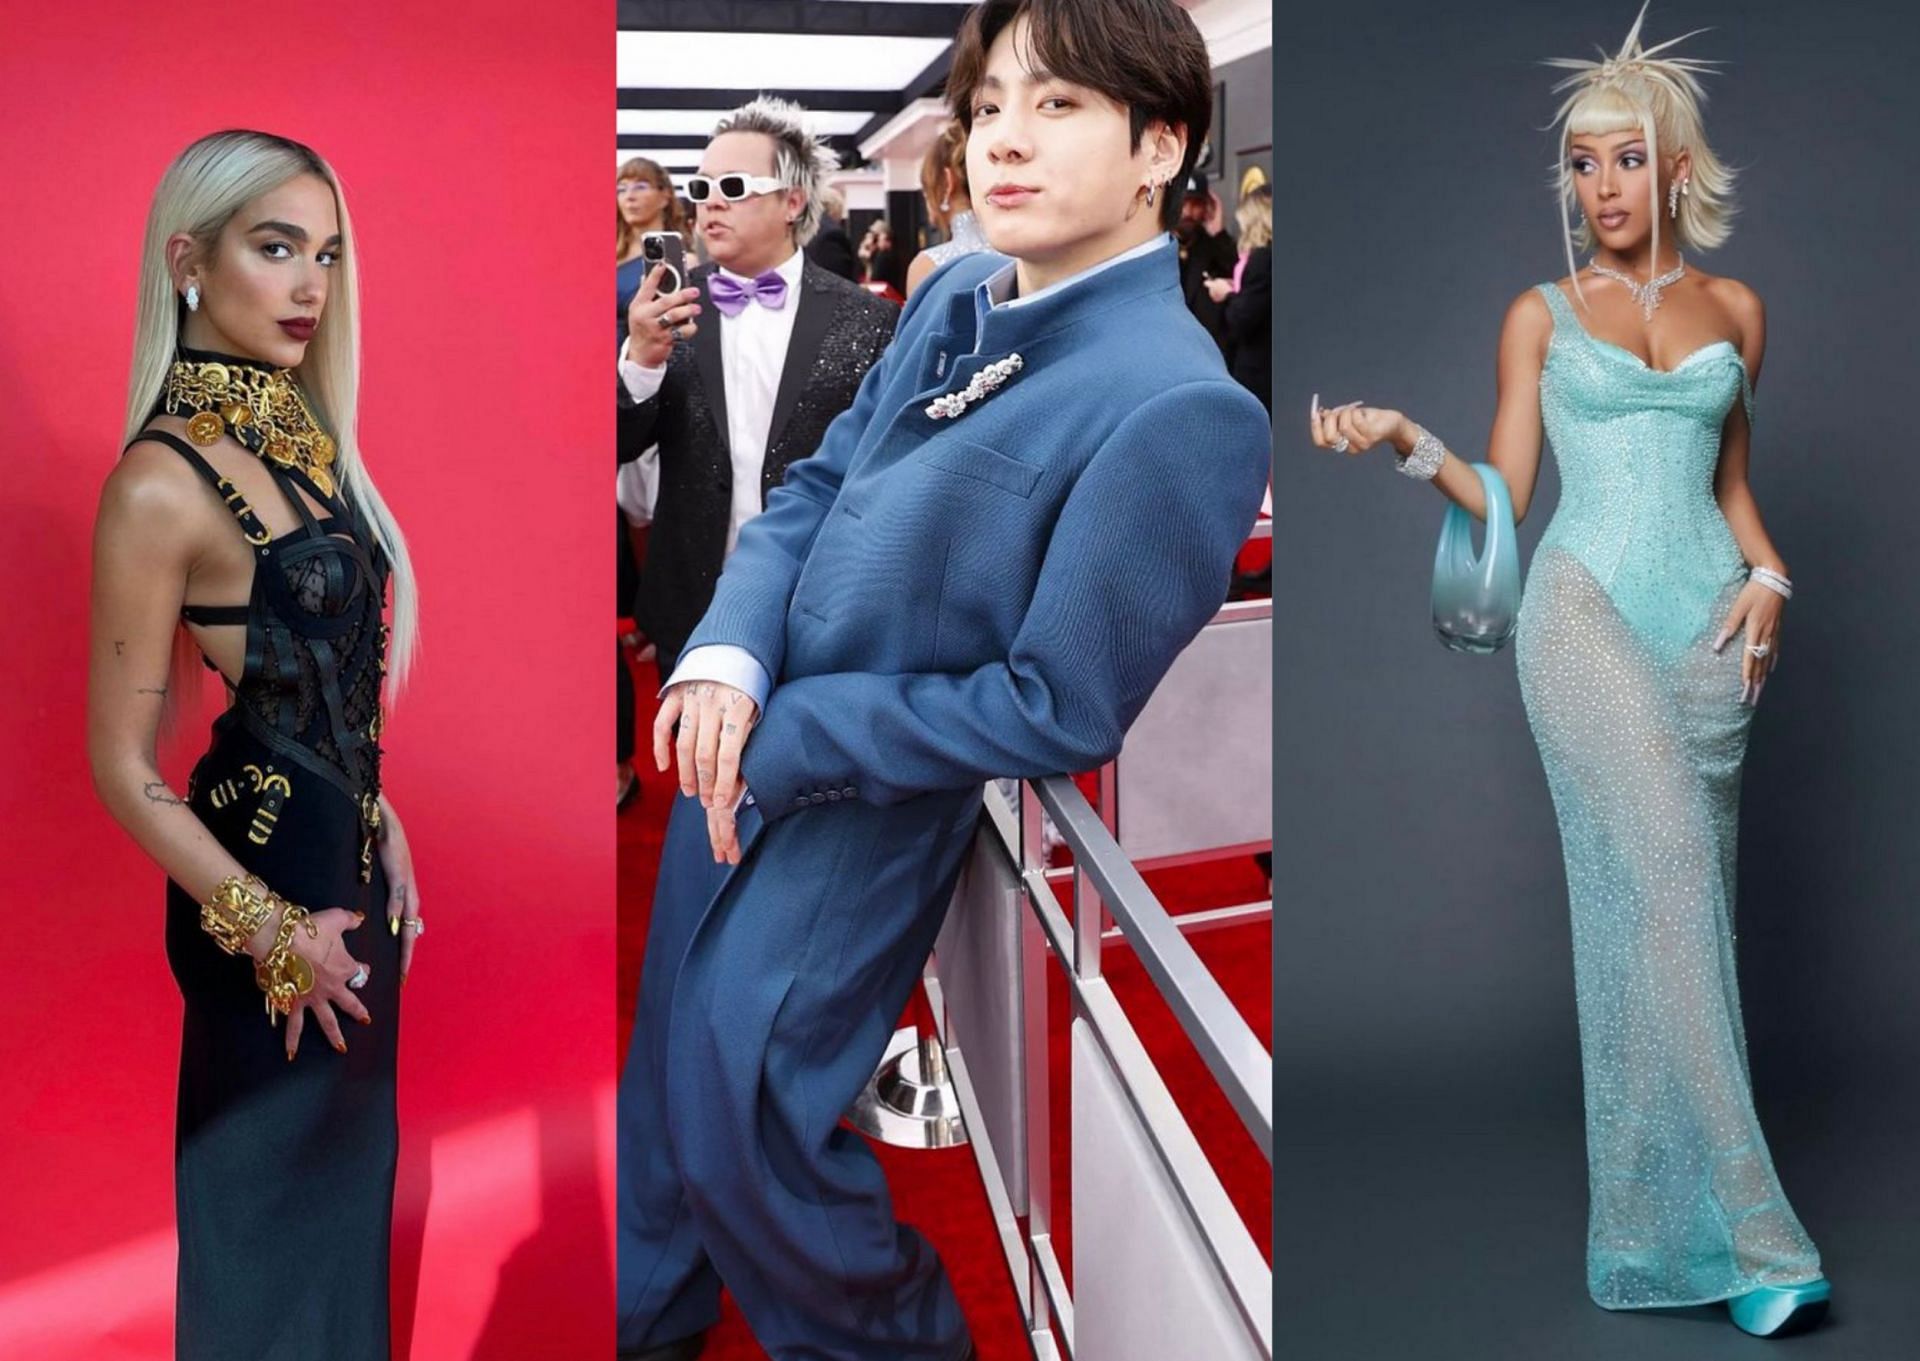 Grammys 2022: BTS members show off their style in colorful suits before  taking to the stage